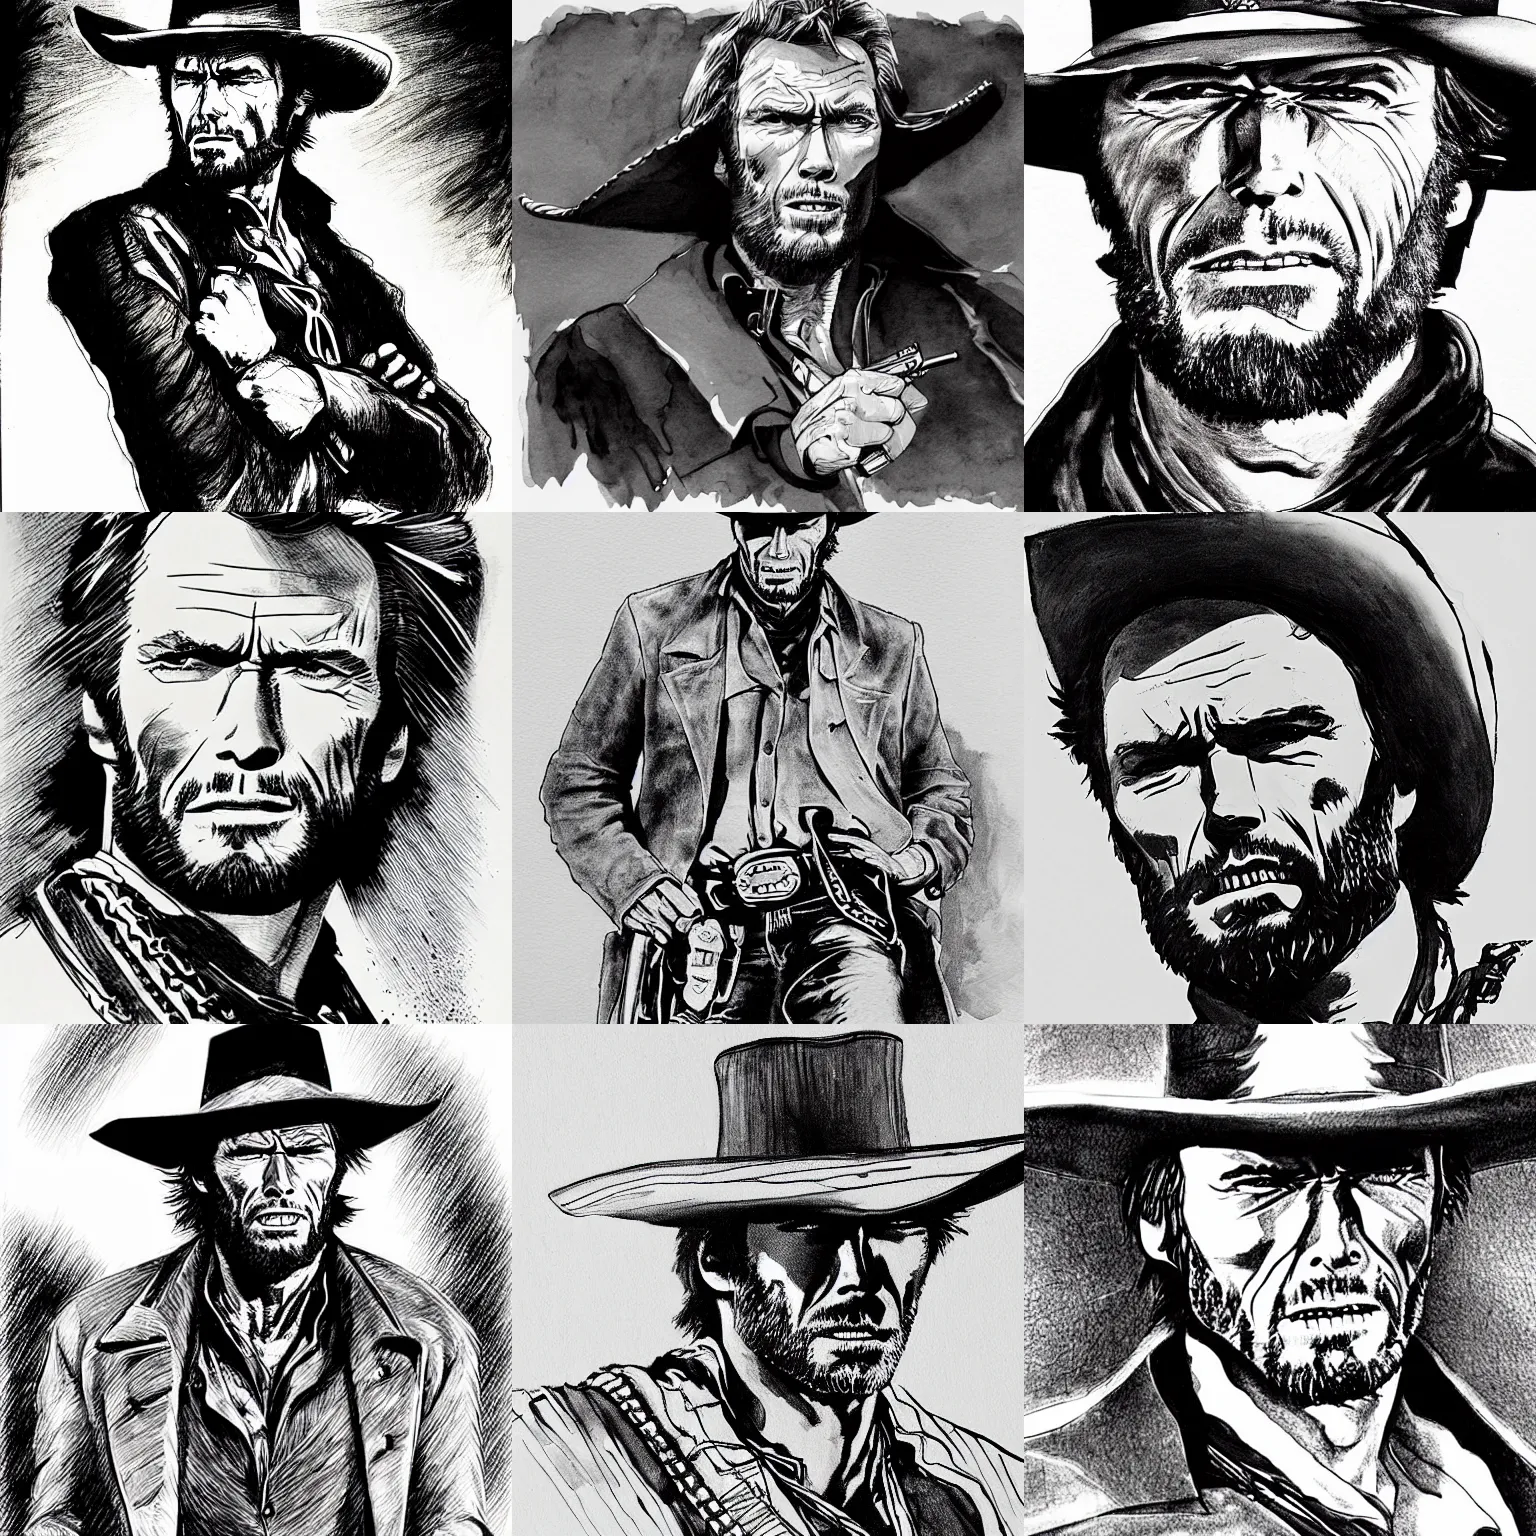 Prompt: Clint Eastwood. A Fistful Of Dollars. Western. Classic Pose. Portrait. Pen and Ink. Detailed, Monochrome